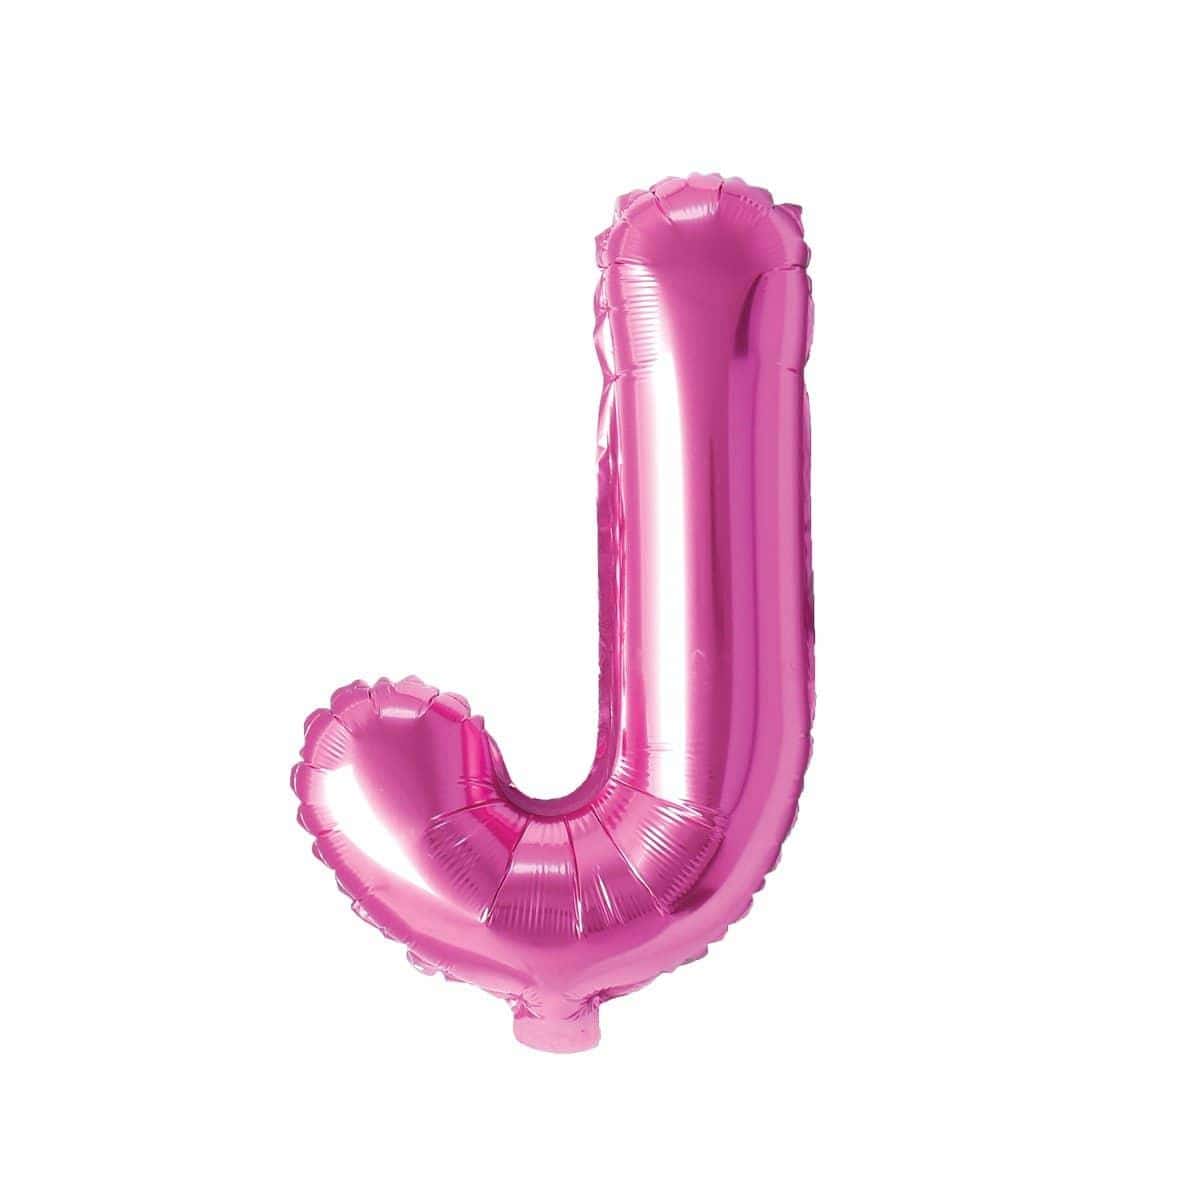 Buy Balloons Pink Letter J Foil Balloon, 16 Inches sold at Party Expert